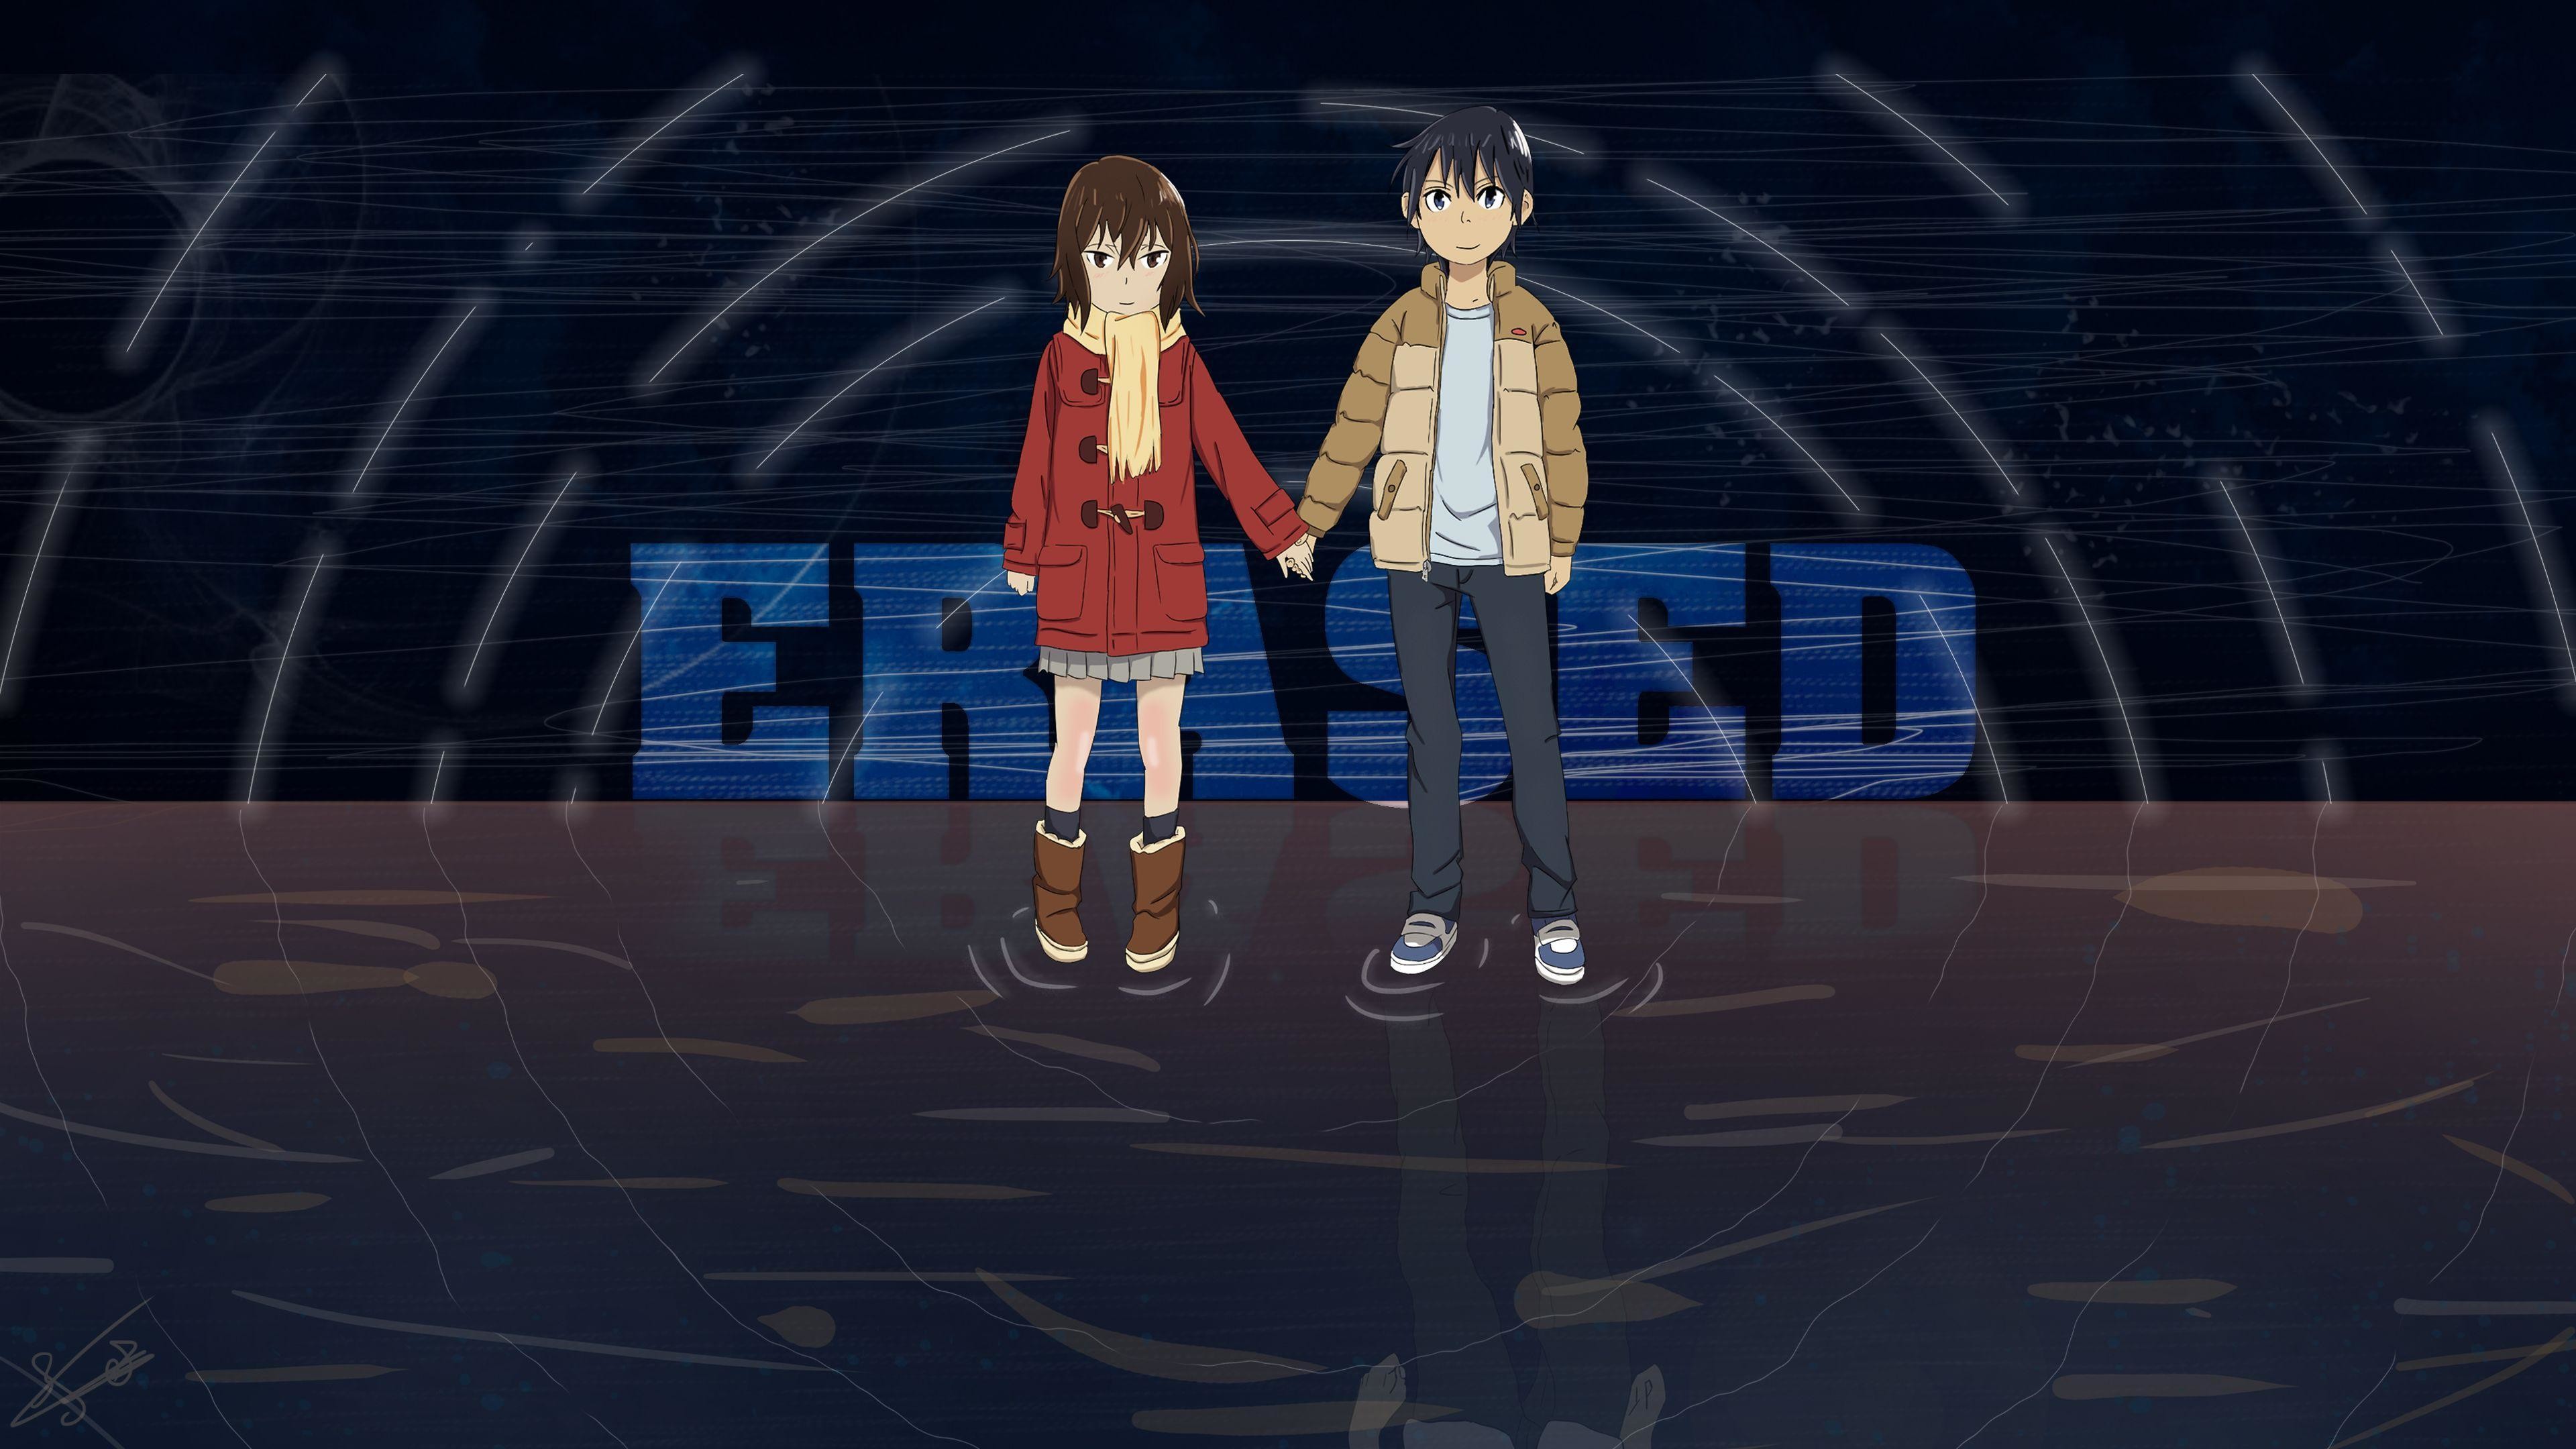 Erased 1920X1080 Wallpapers